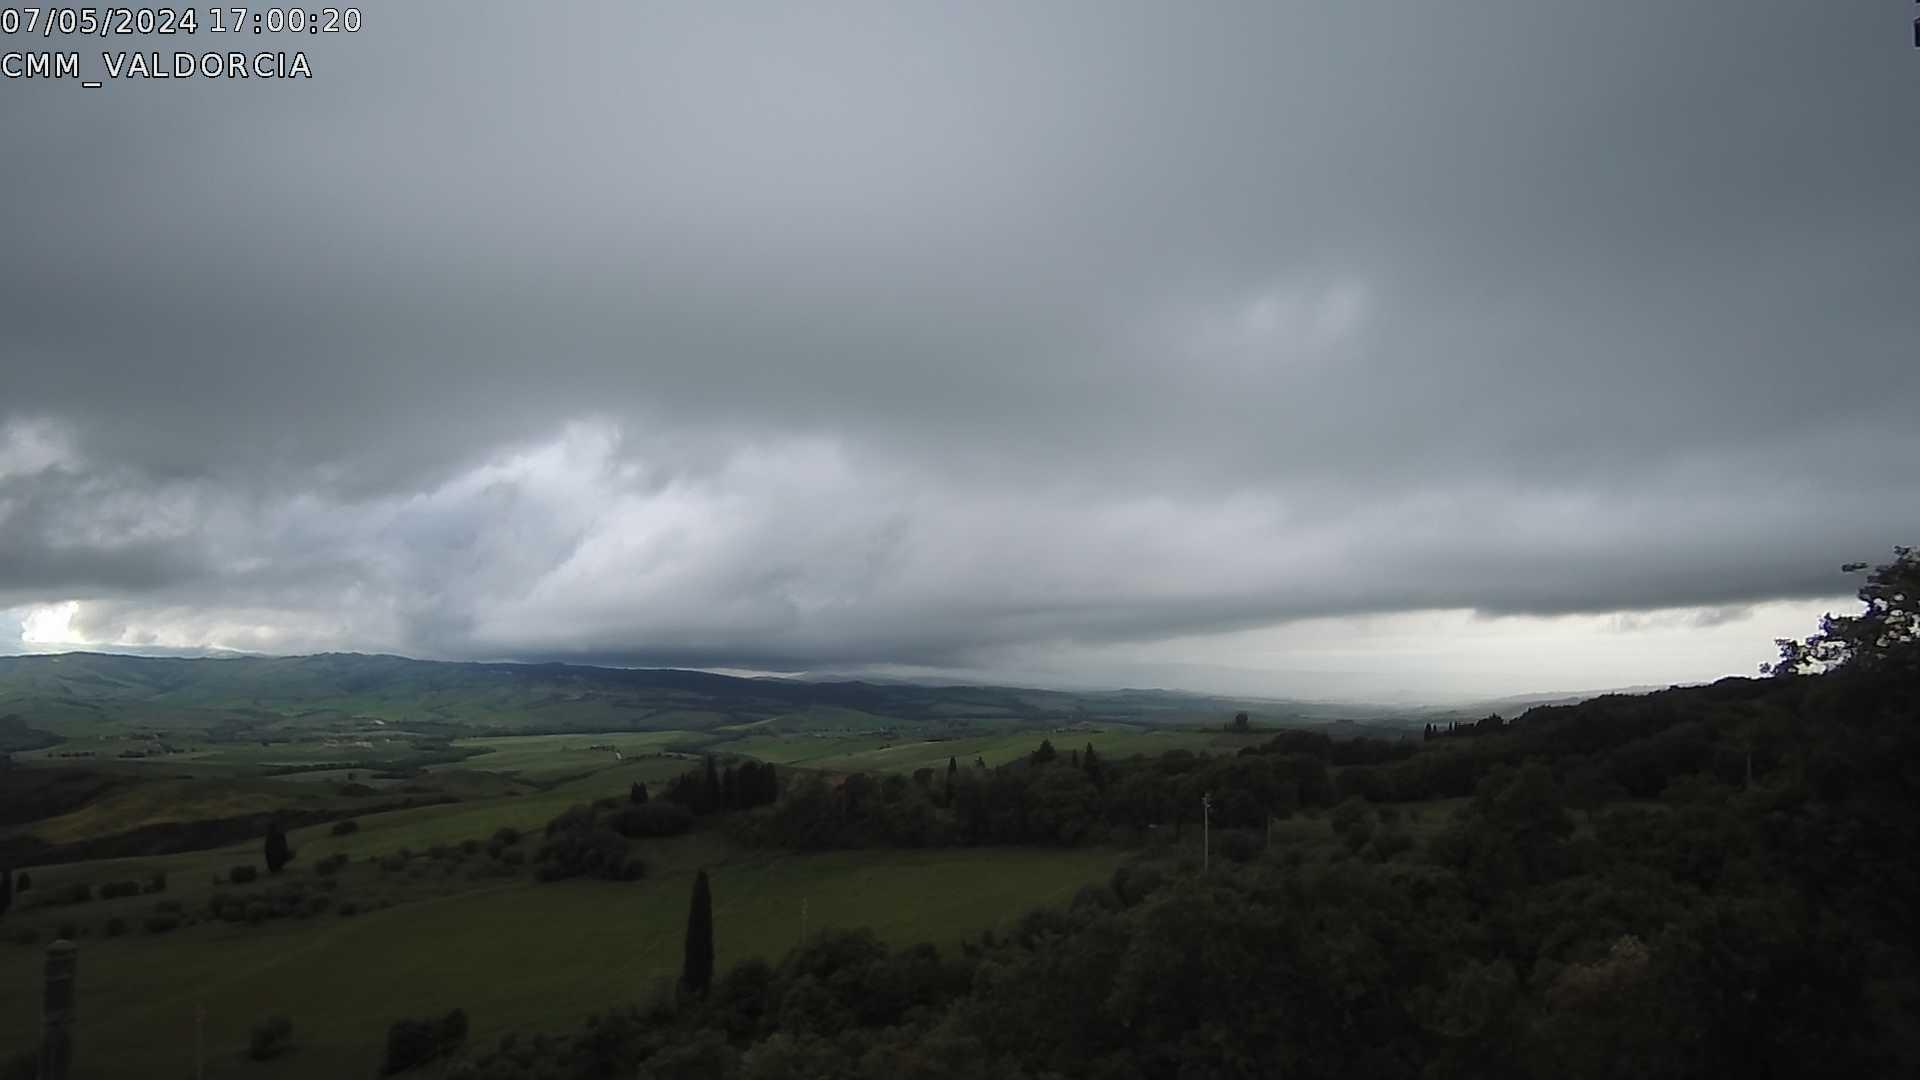 webcam Vald'Orcia - Panorama